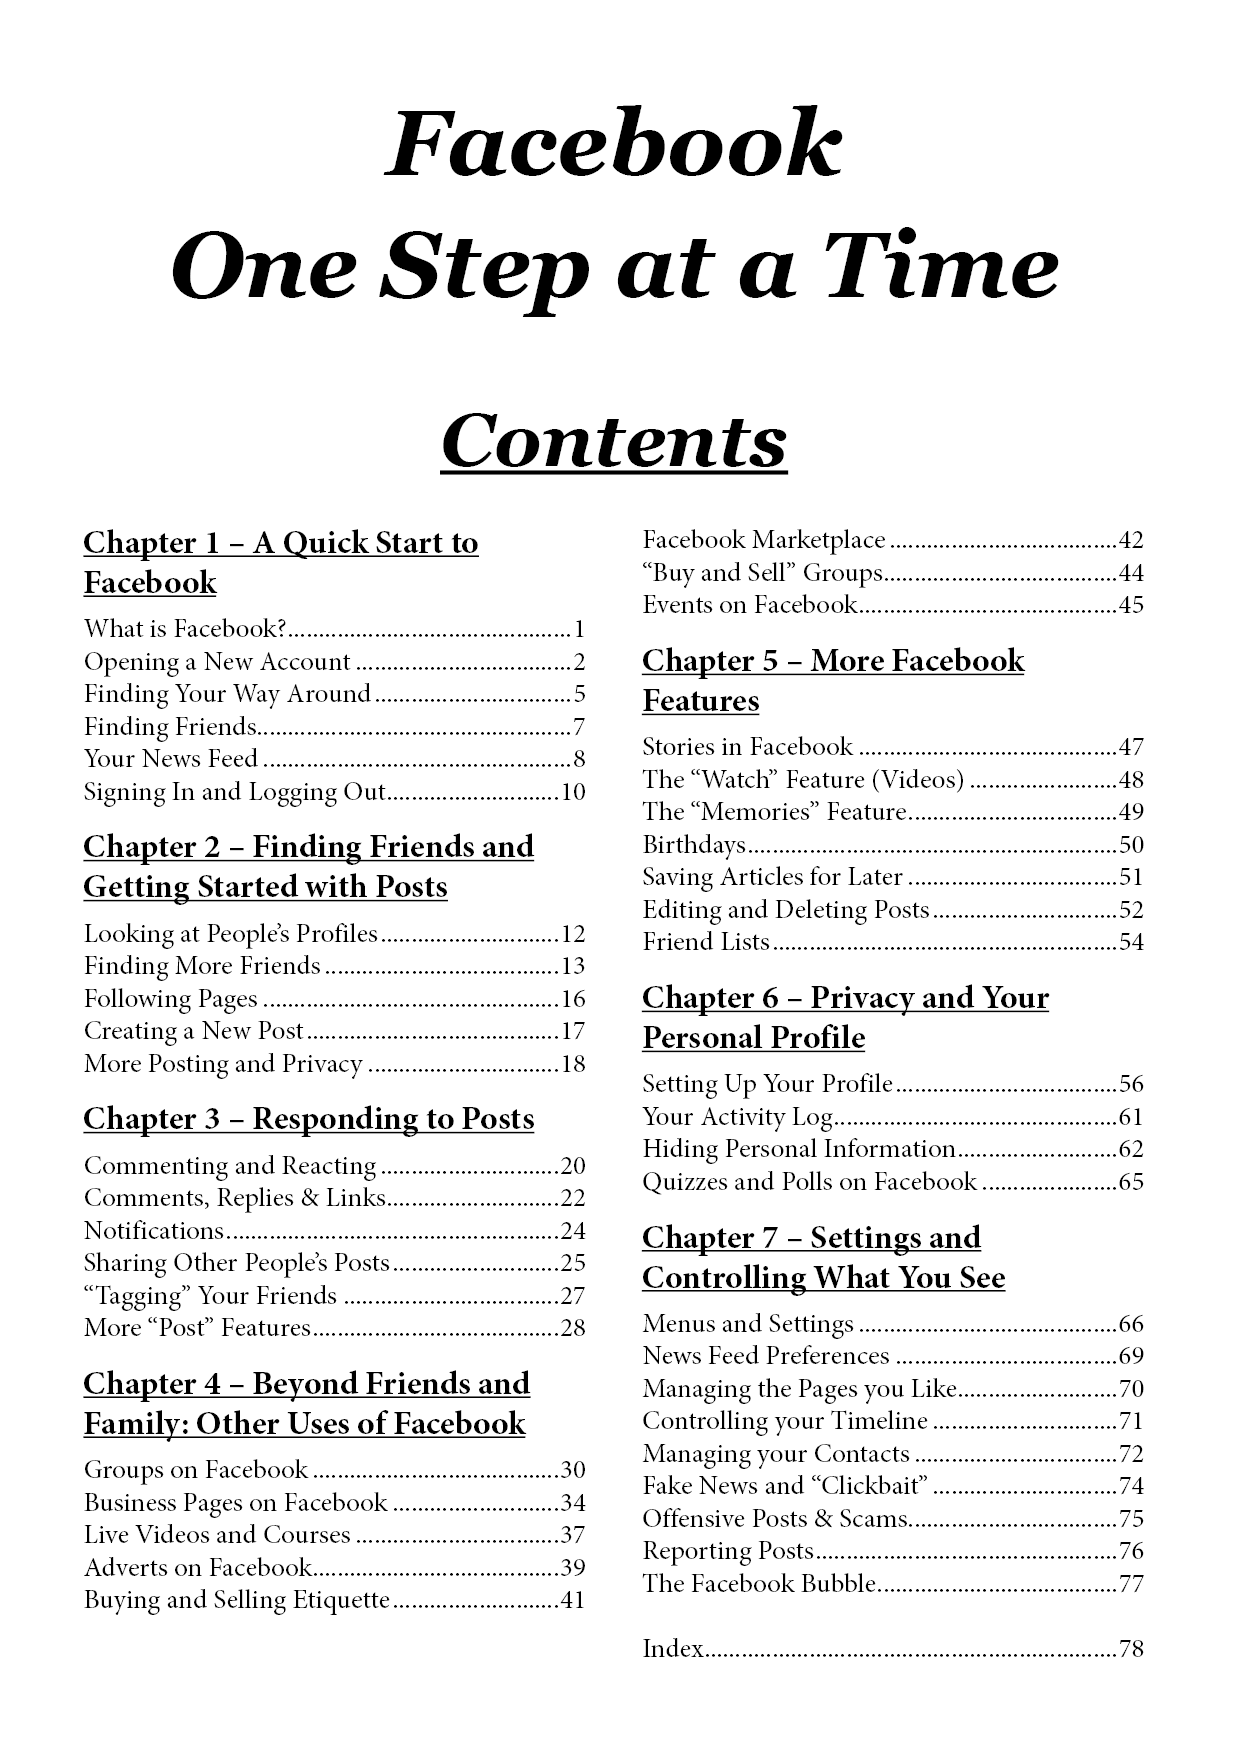 Facebook One Step at a time contents page